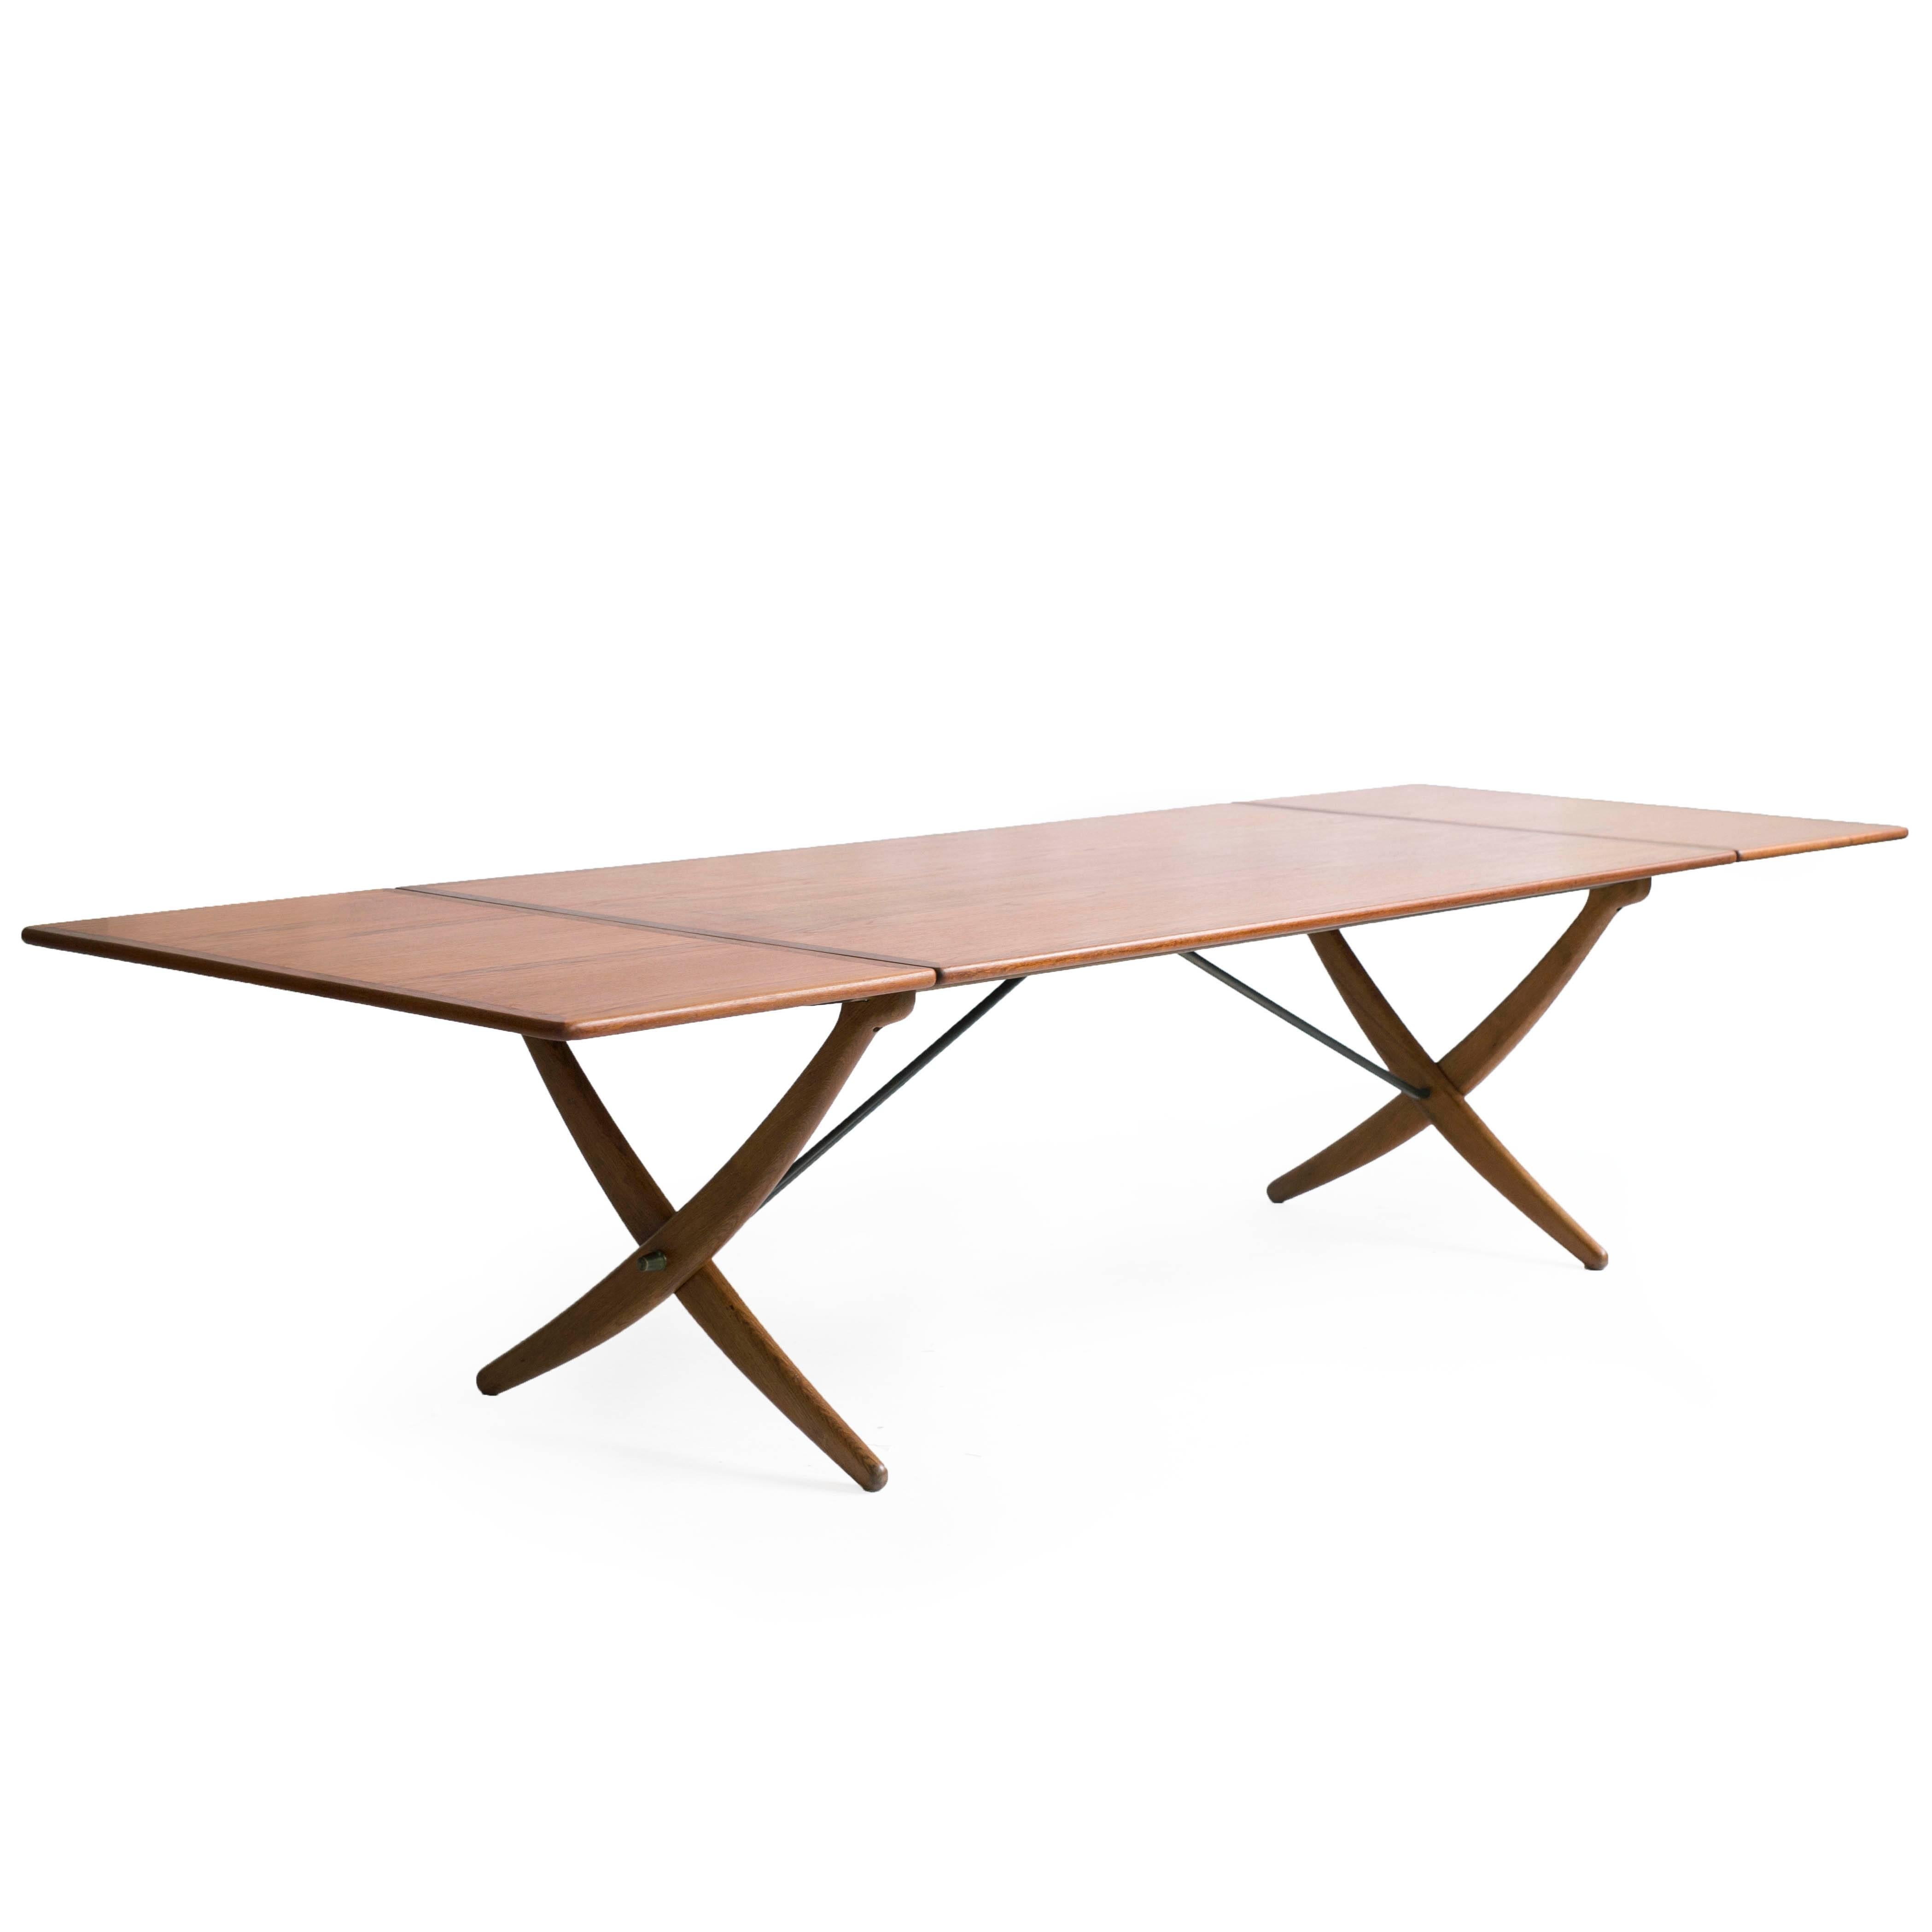 The large Hans J. Wegner sabre leg dining table with top and end leaves of teak, legs of oak.

Designed by Wegner, circa 1958 executed by cabinetmaker Andreas Tuck, model AT-314.

Measures: 190 cm to 310 cm width with both leaves up.